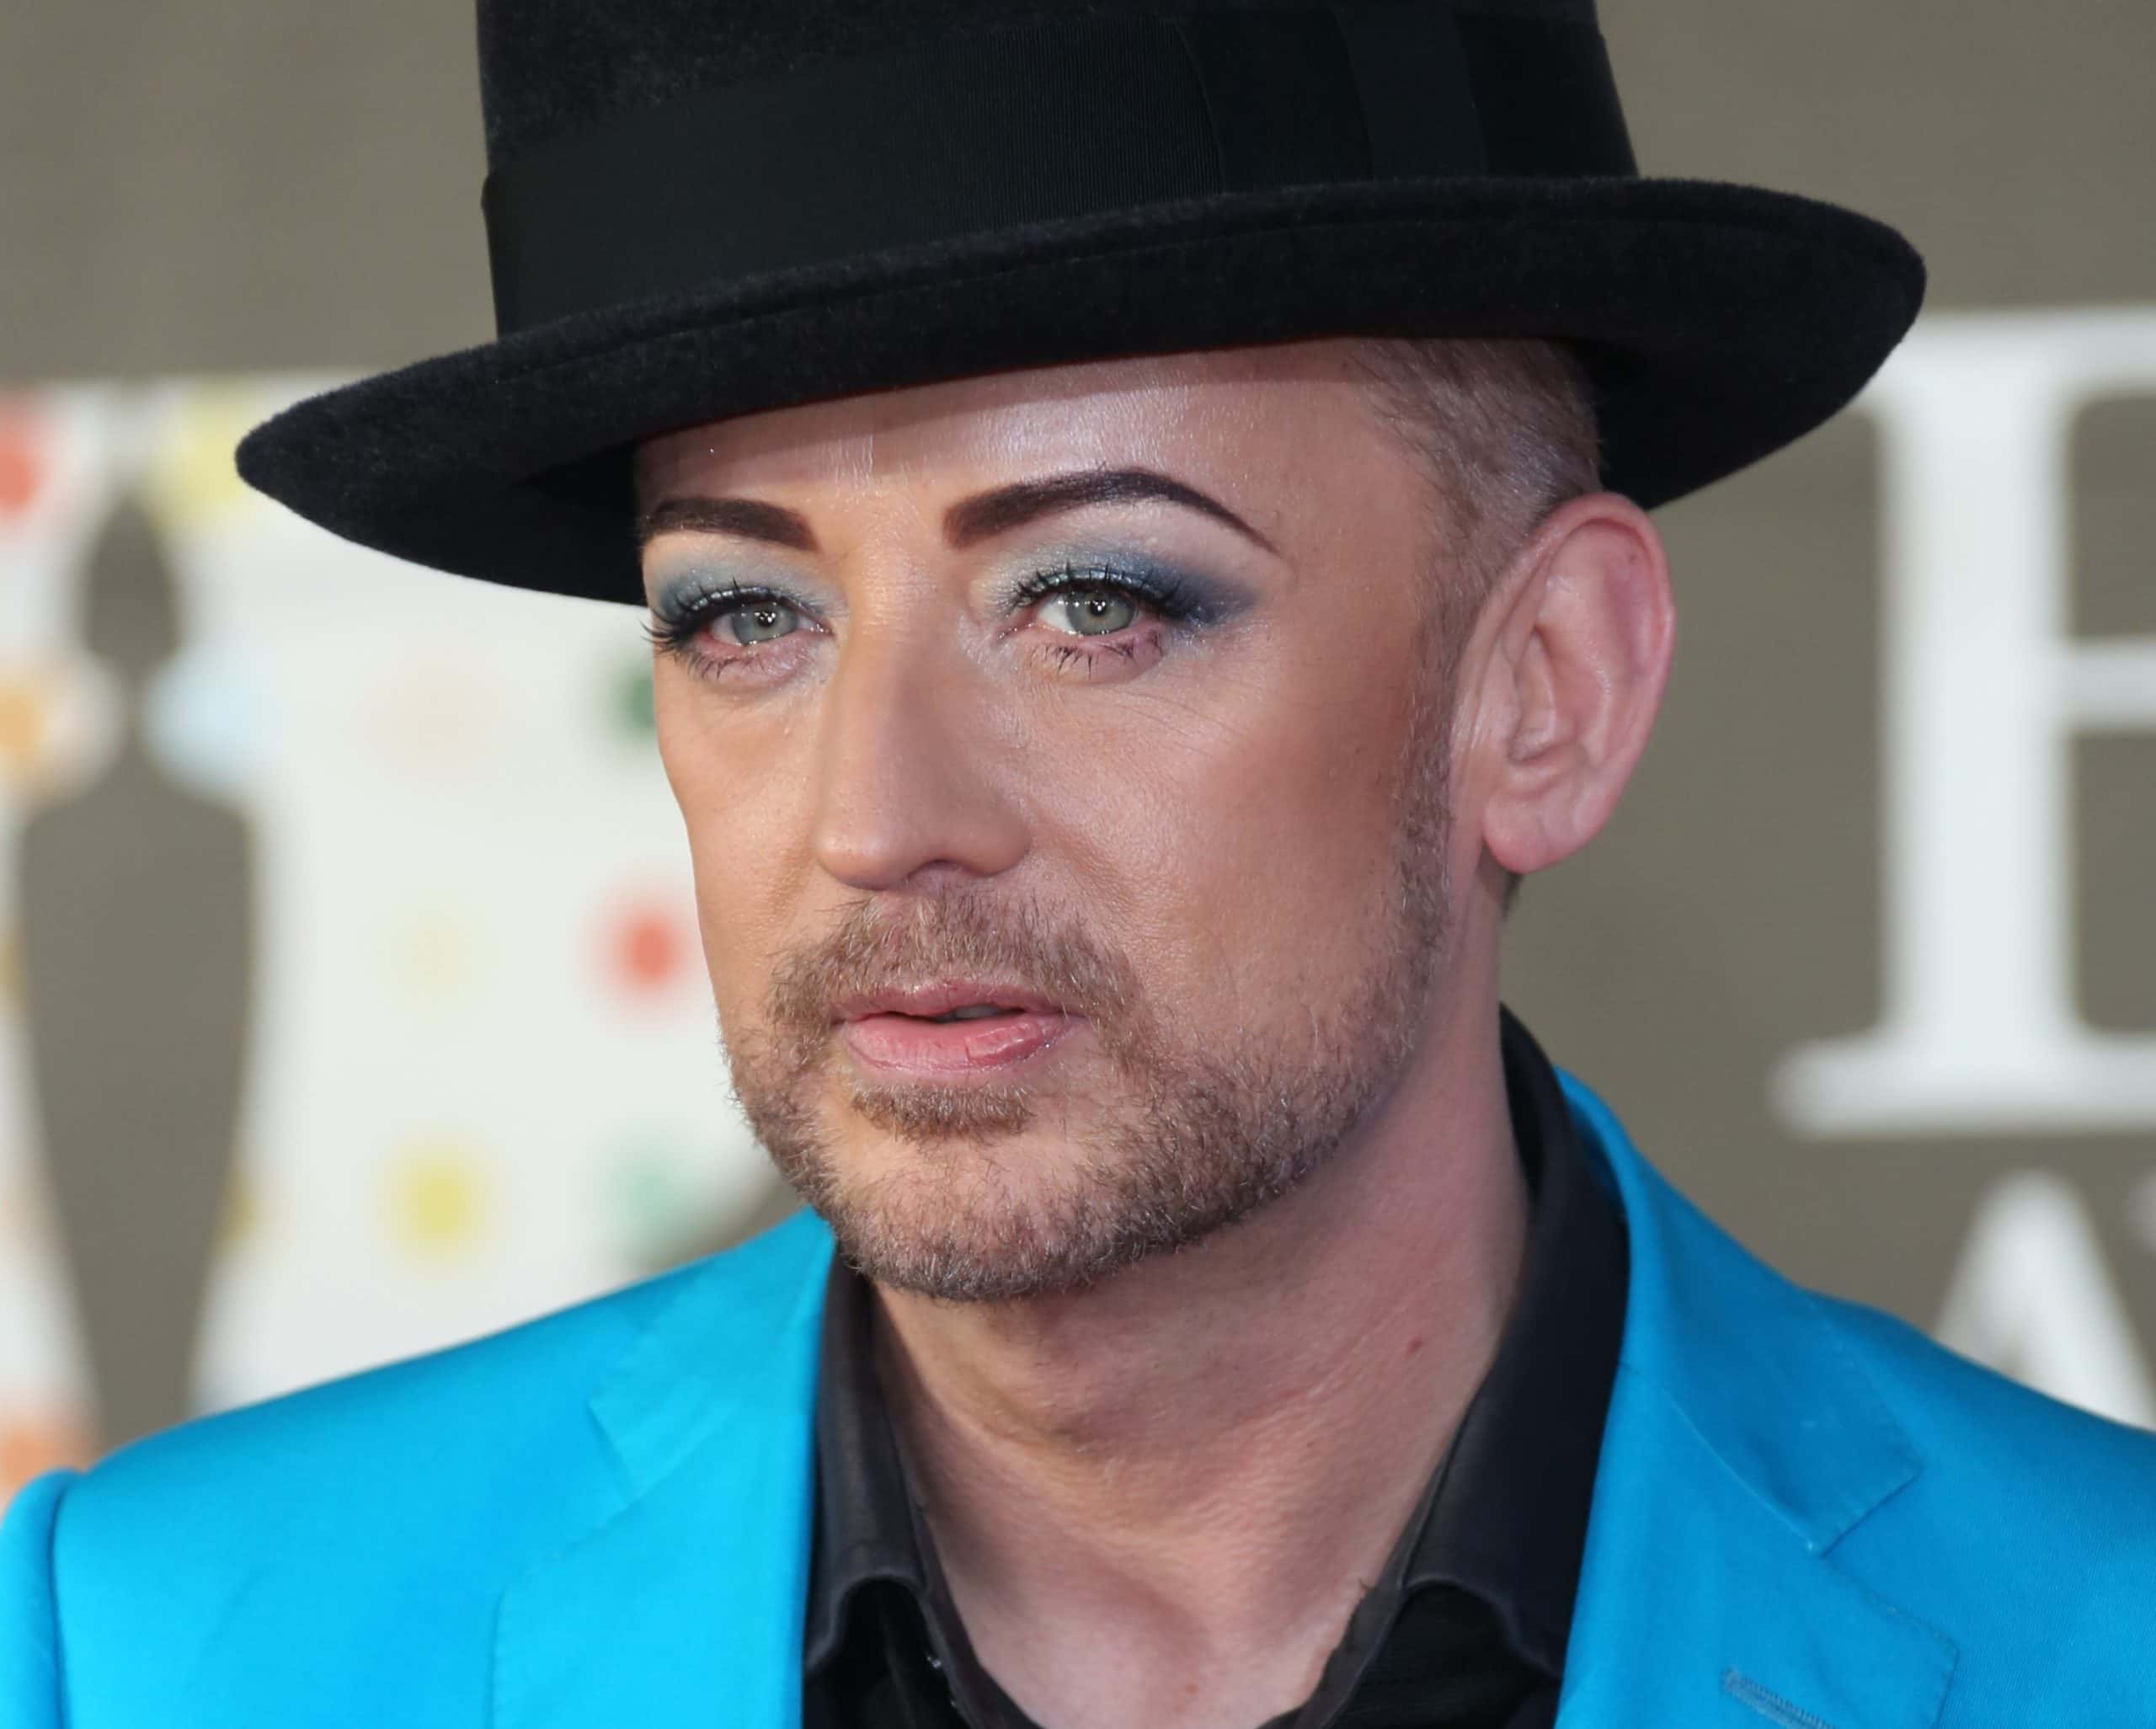 Boy George: 25 Things You Don't Know About Me